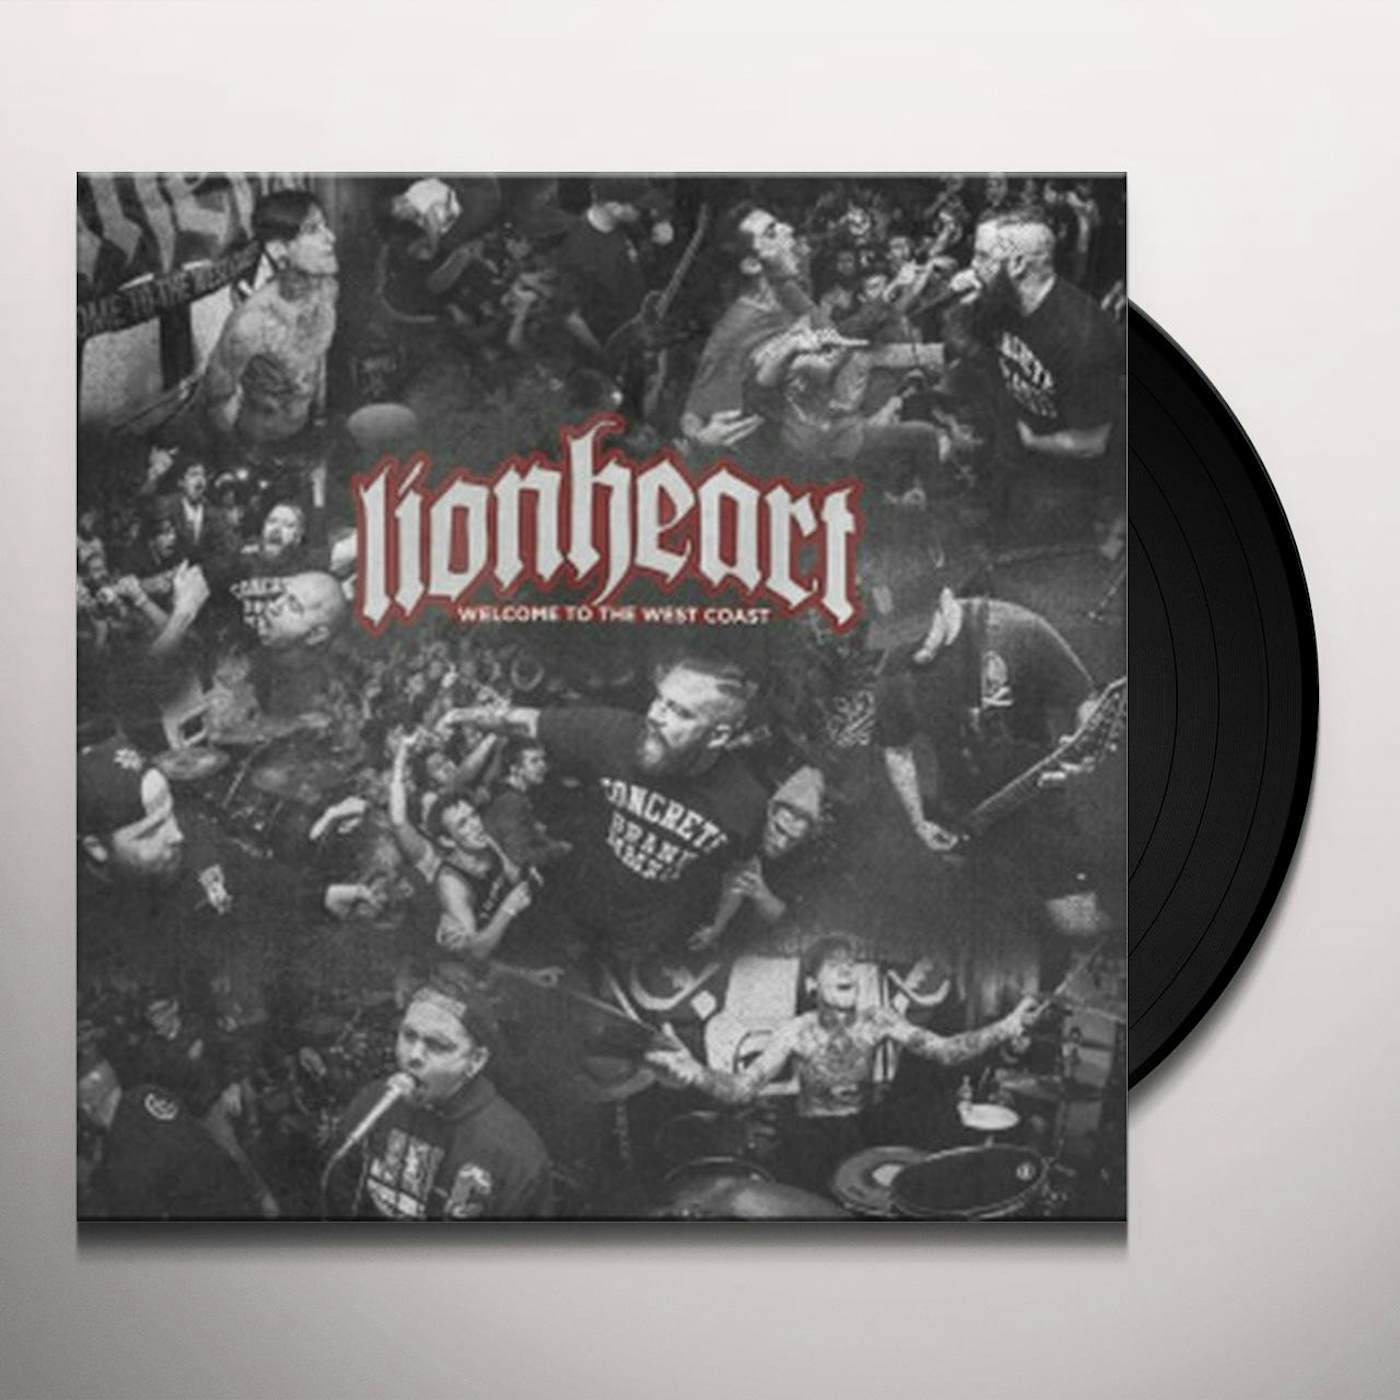 Lionheart Welcome to the West Coast Vinyl Record